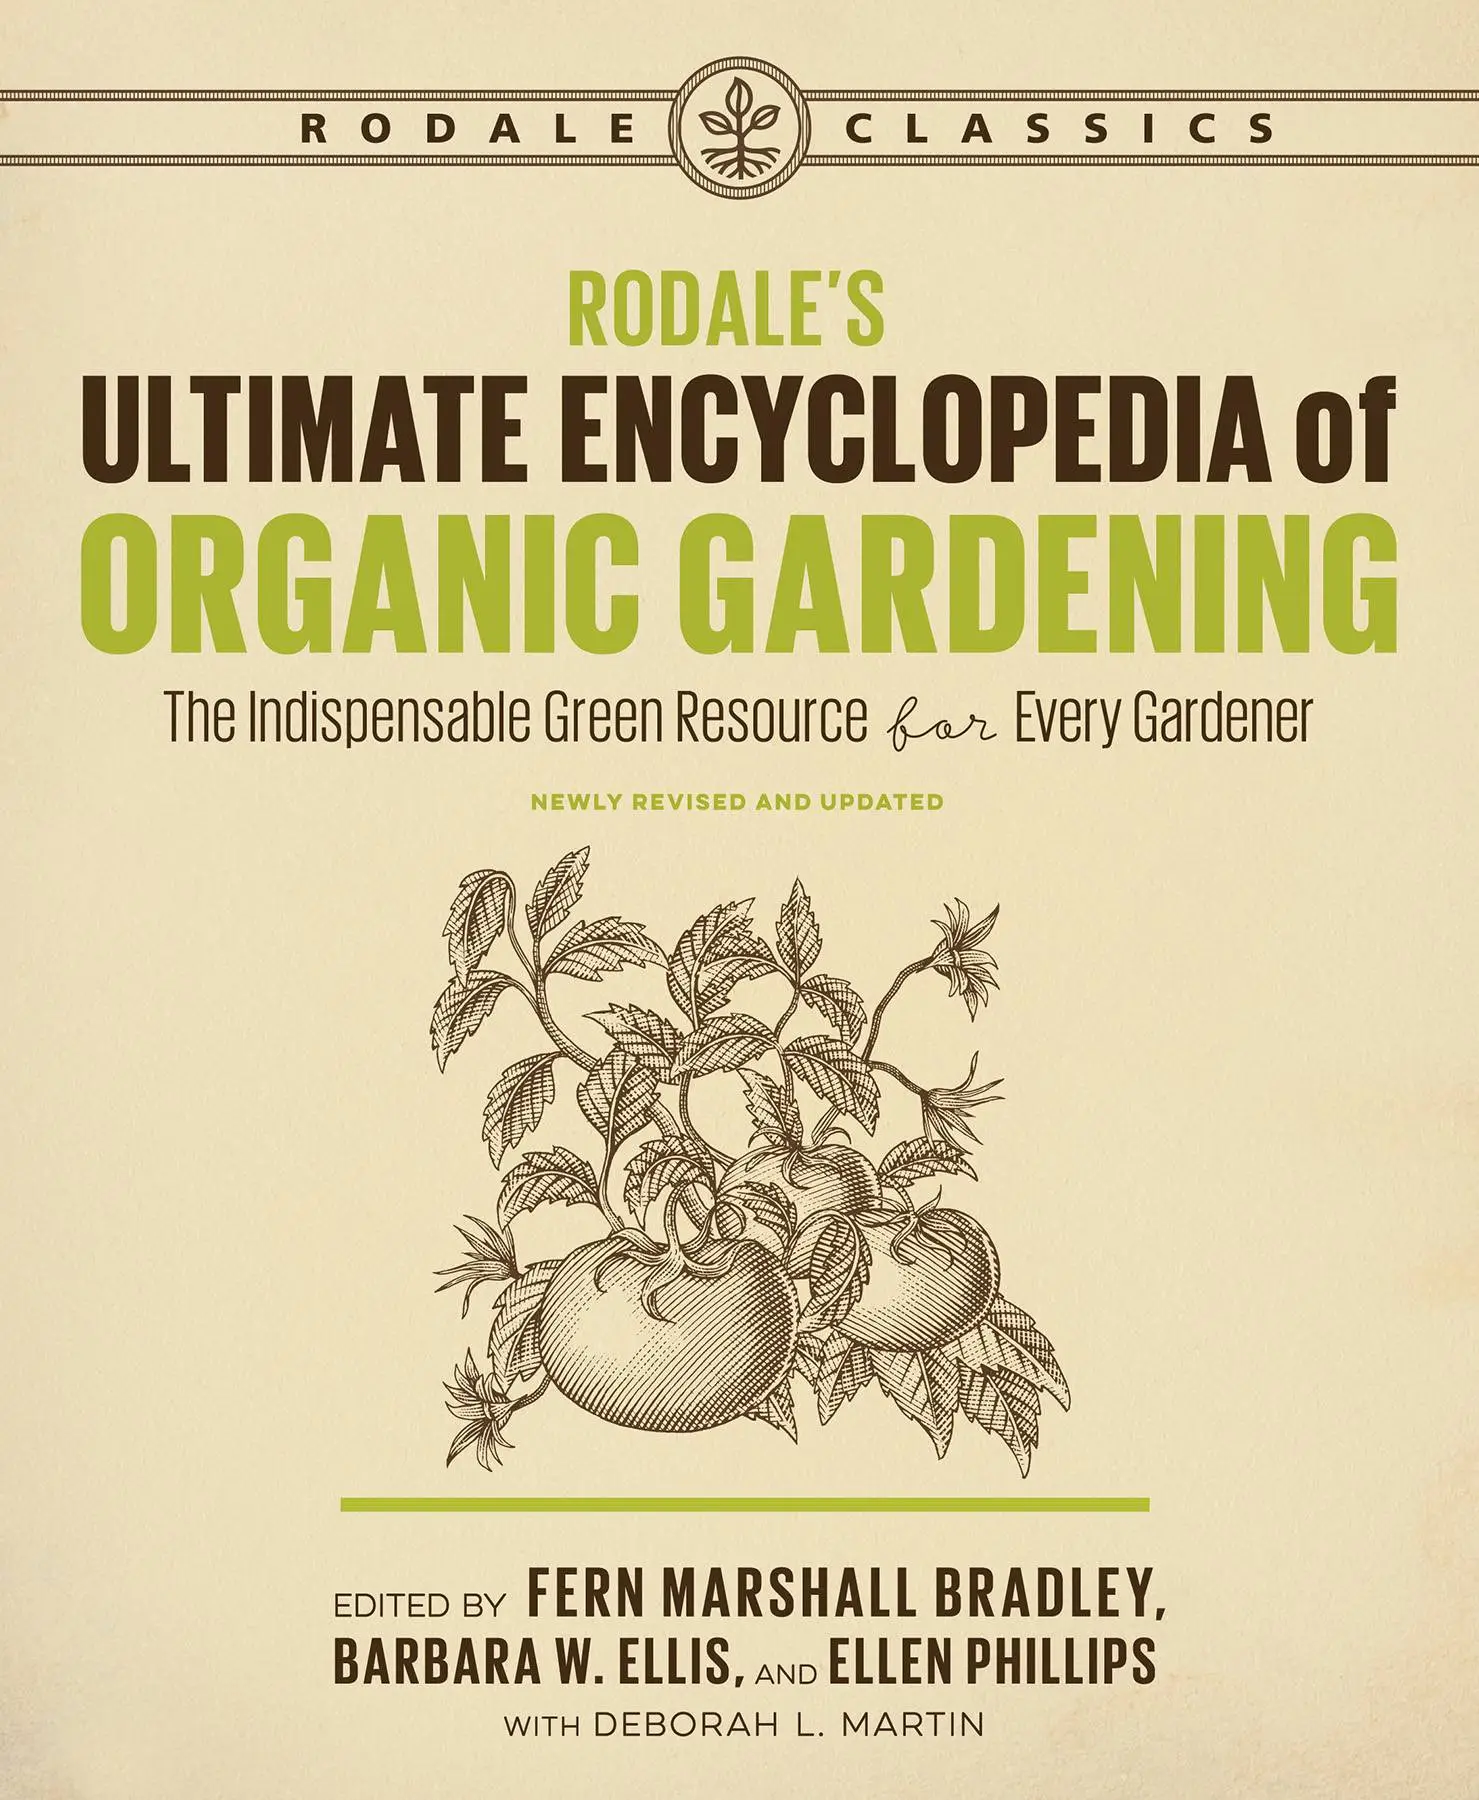 Rodale's Ultimate Encyclopedia of Organic Gardening: The Indispensable